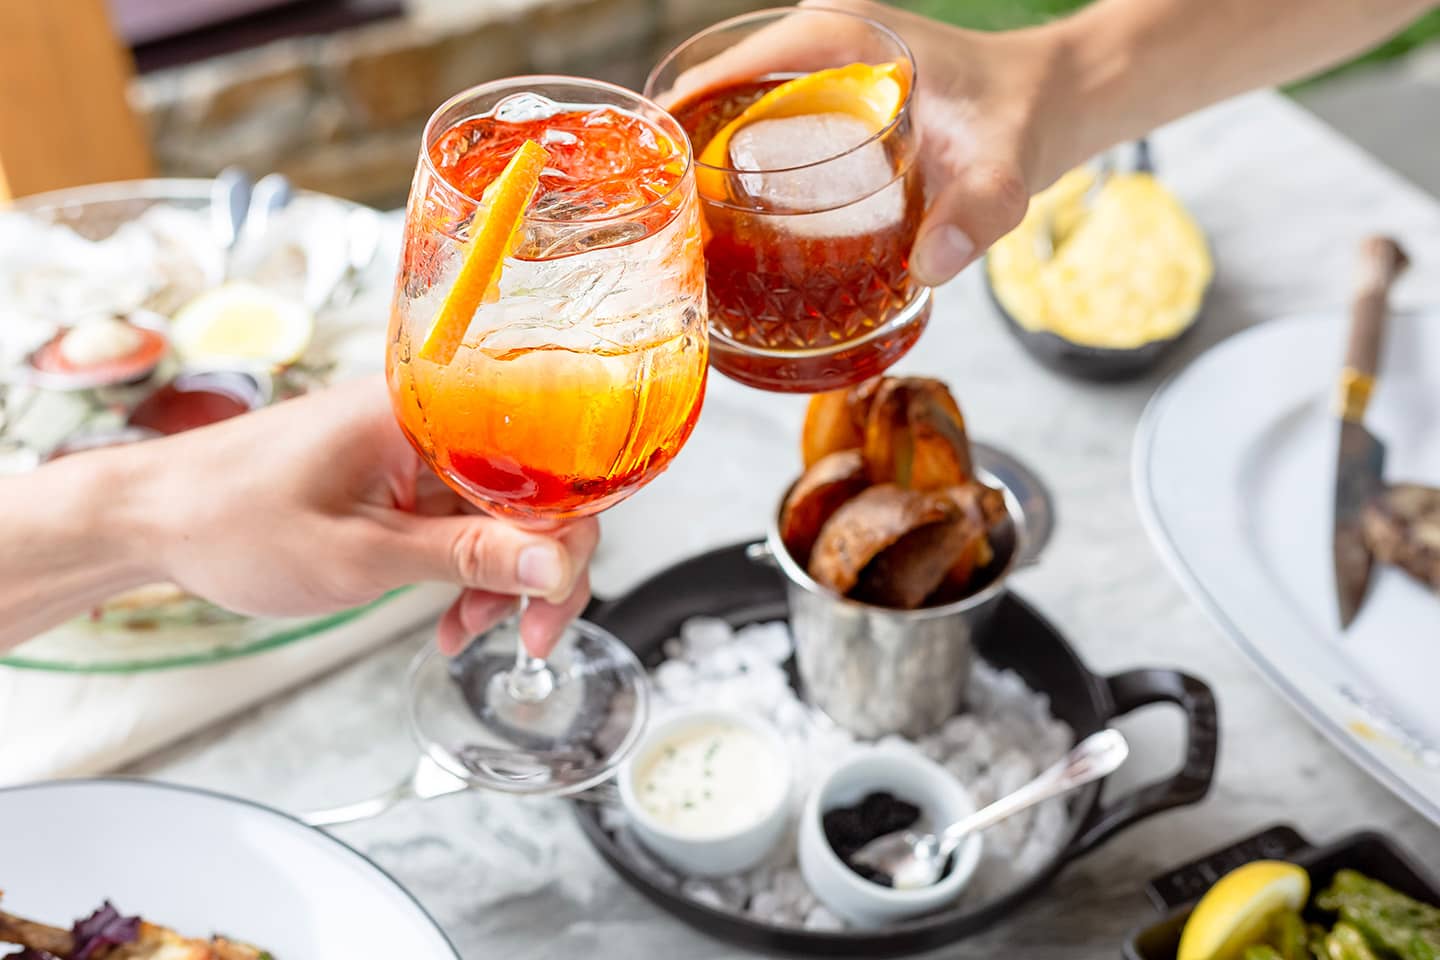 Two people toasting with aperol spritz drinks at a dining table.